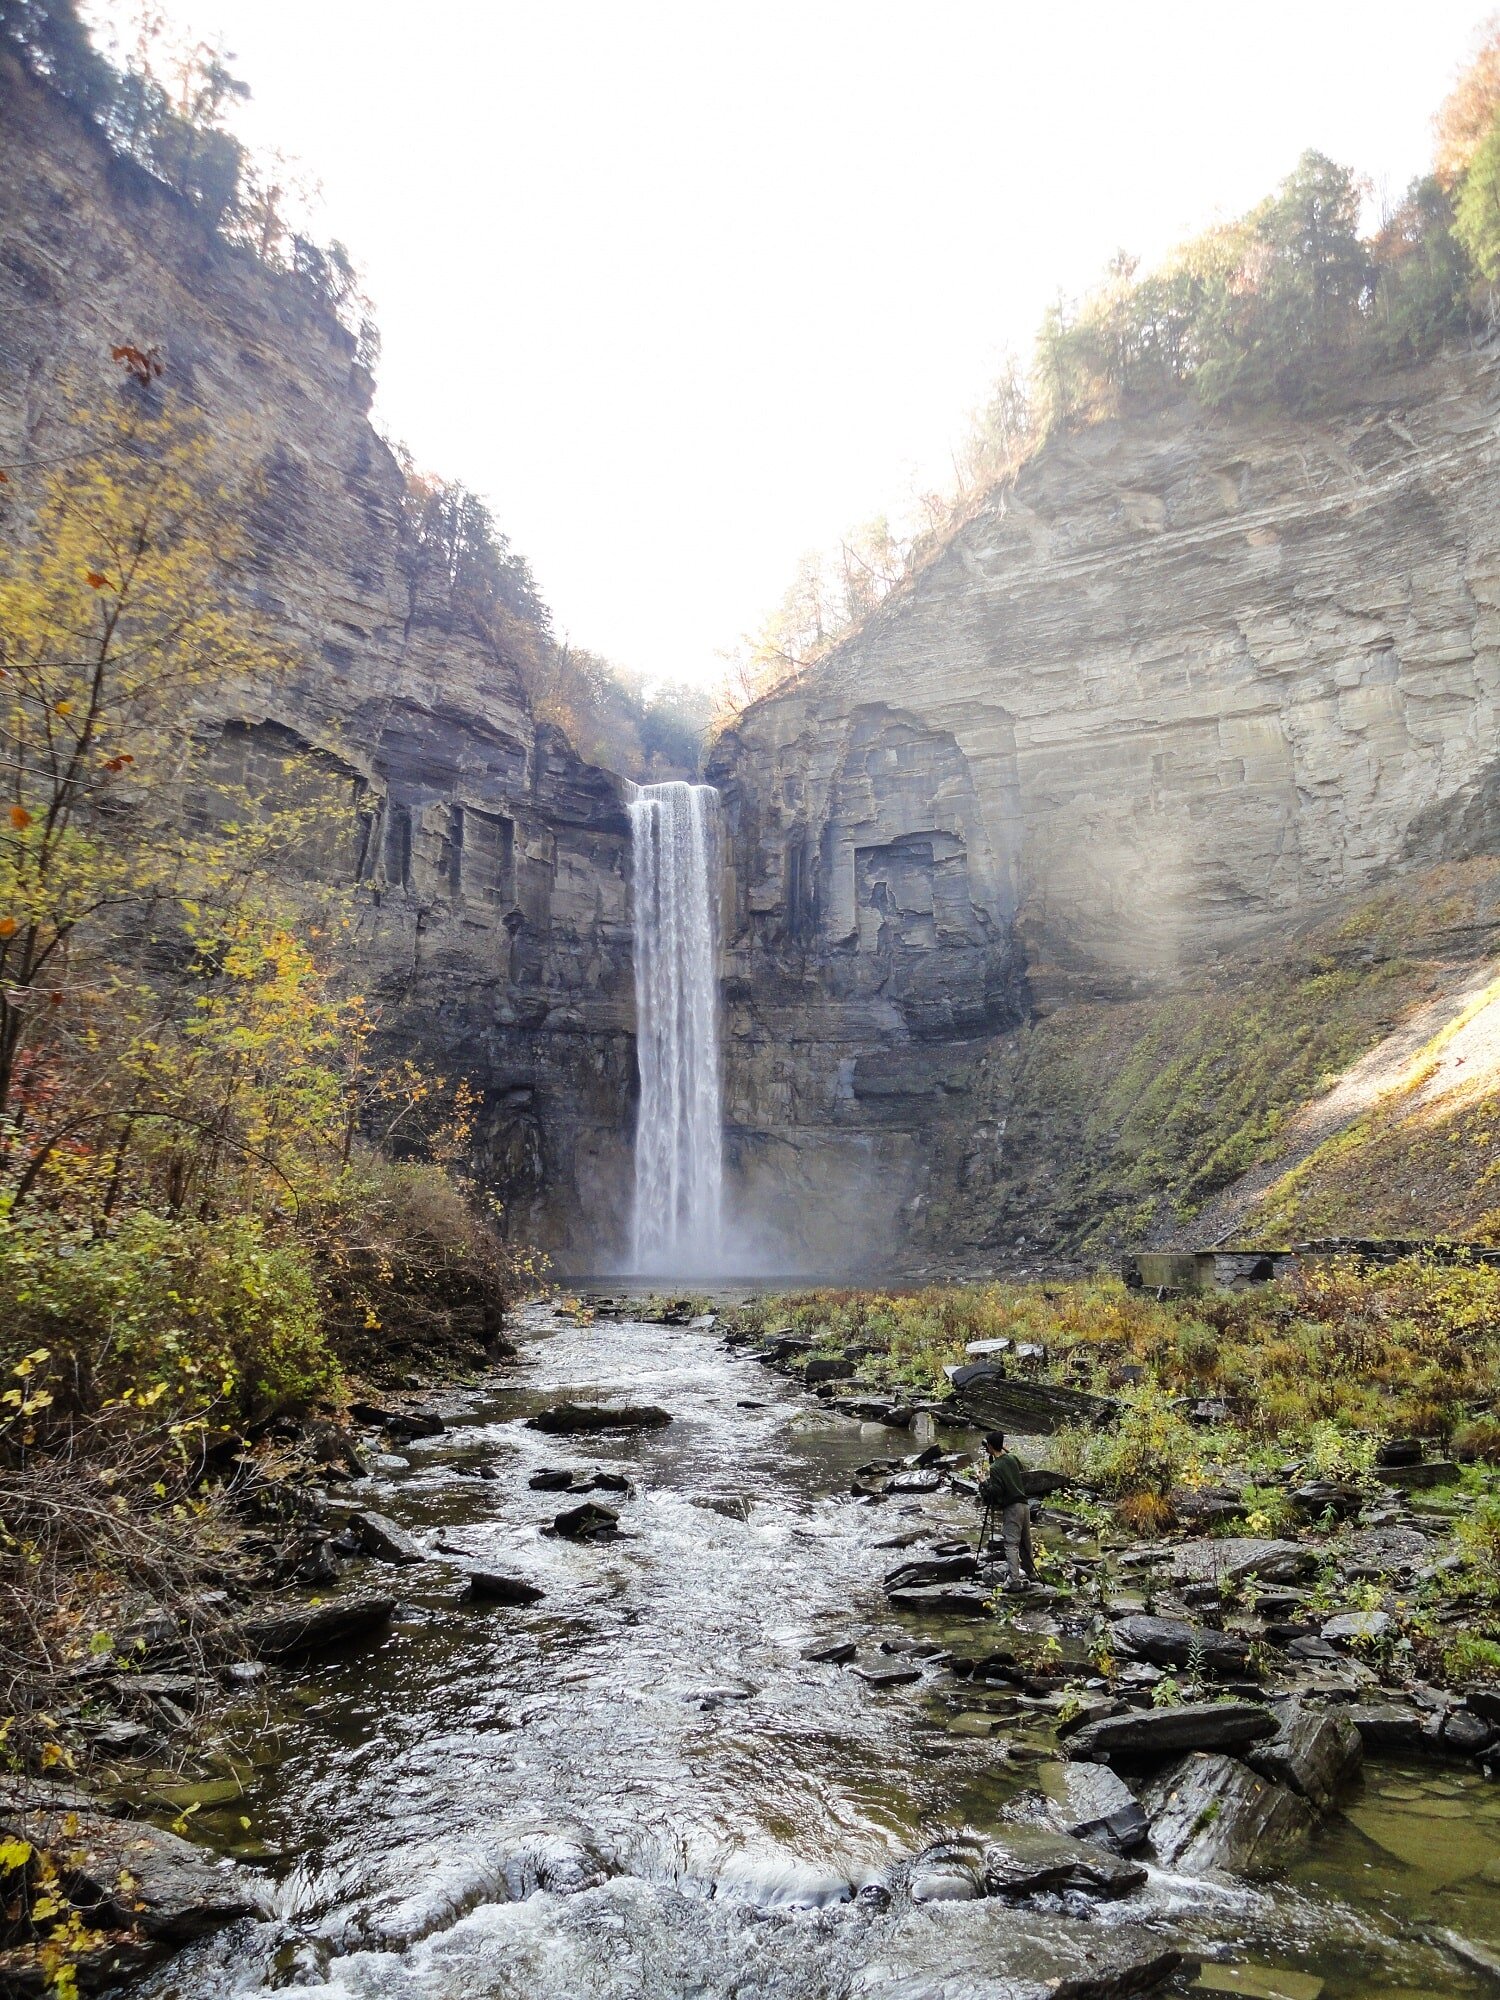  Taughannock Falls State Park, Upstate New York fall travel ideas | Blooming Magnolias Blog | Travel, state parks 